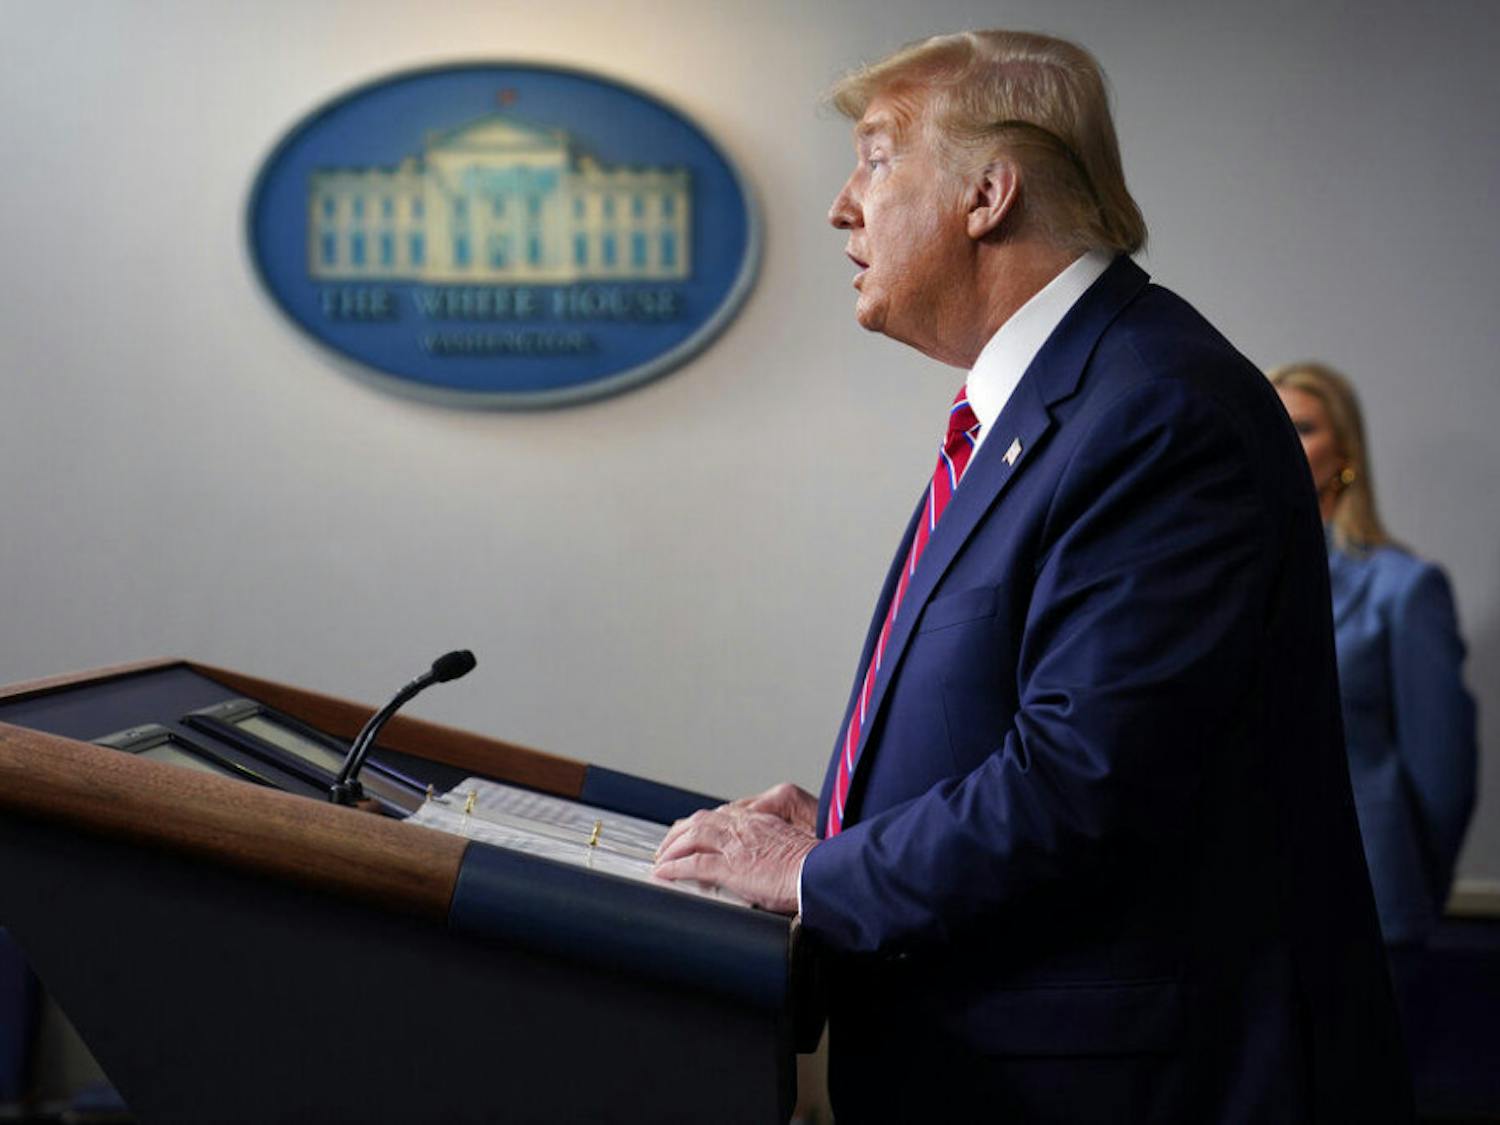 President Donald Trump speaks during a coronavirus task force briefing at the White House, Friday, March 20, 2020, in Washington. (AP Photo/Evan Vucci)